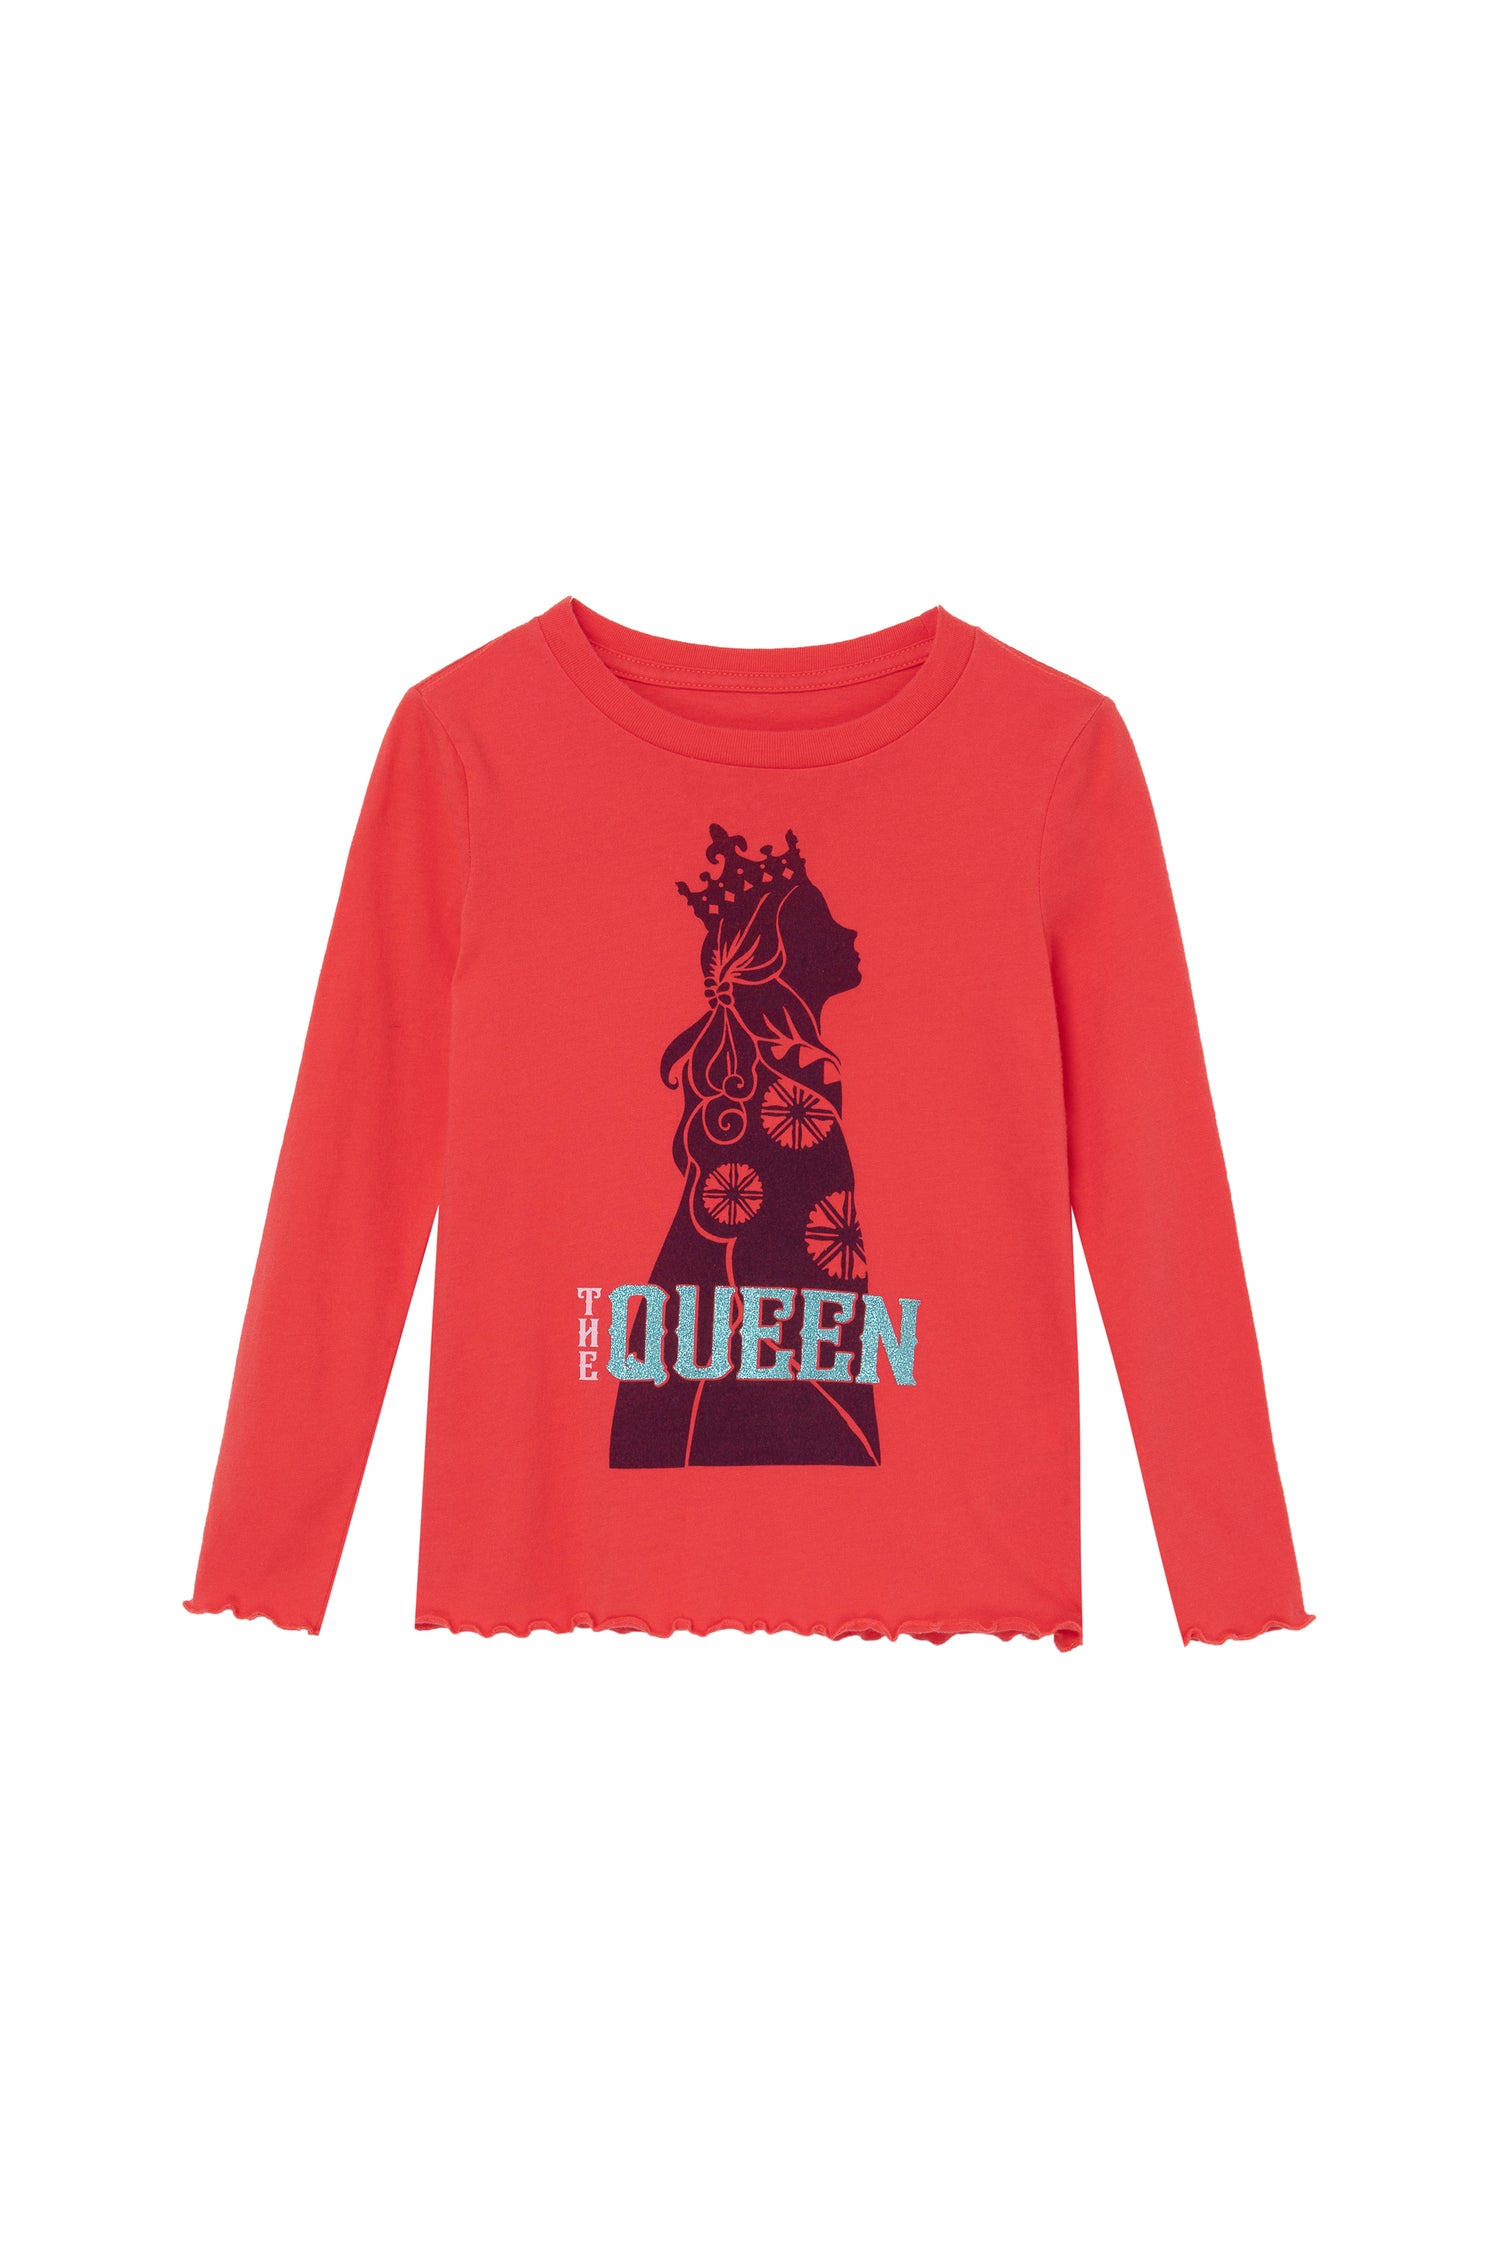 Front view of red "the queen" long sleeve